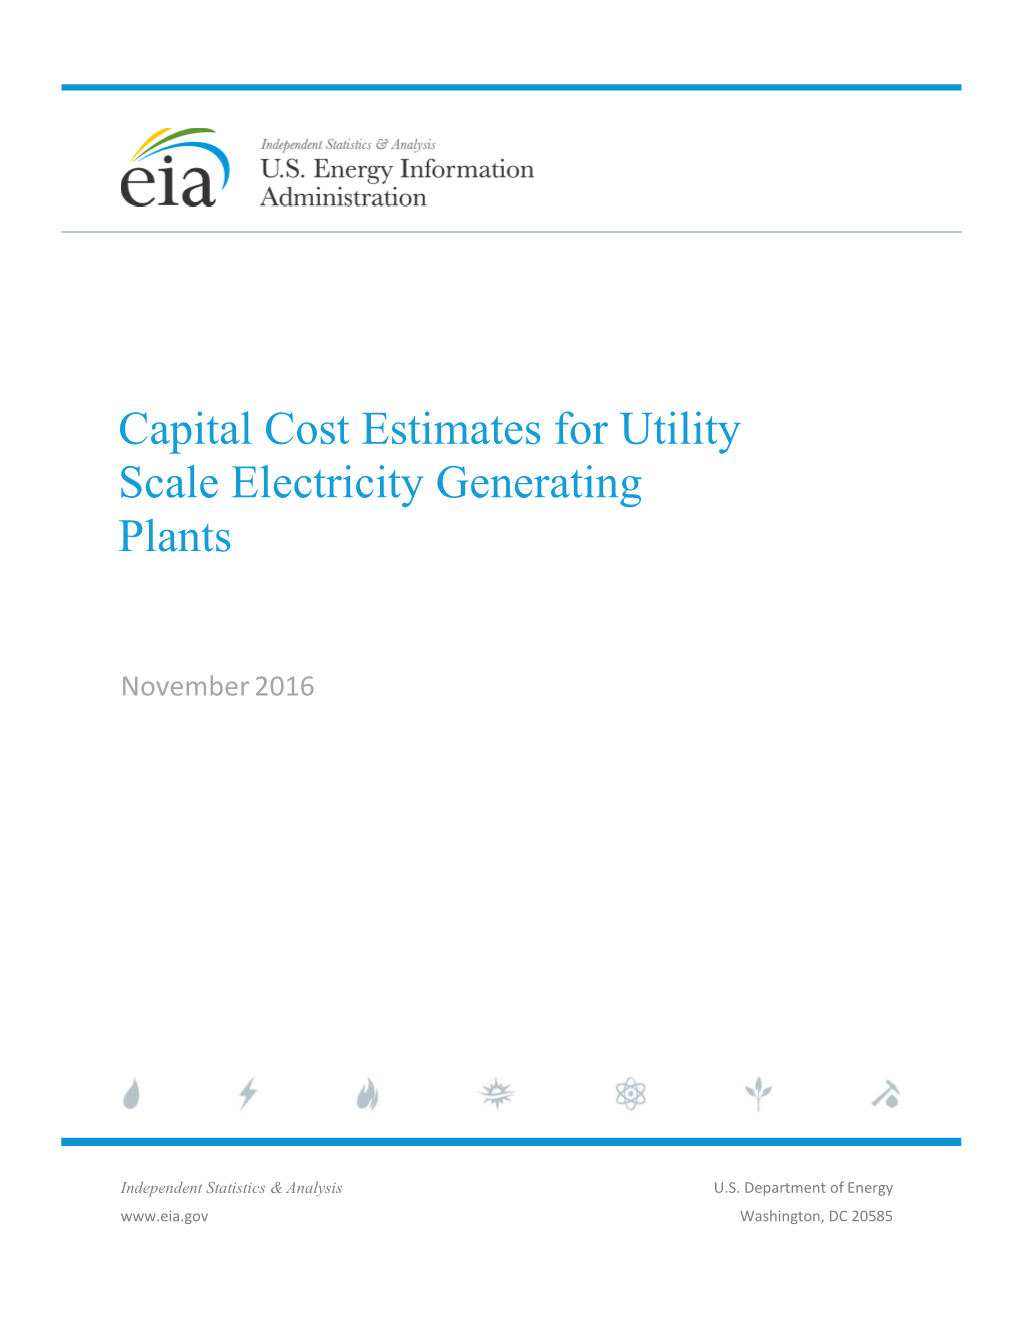 Capital Cost Estimates for Utility Scale Electricity Generating Plants